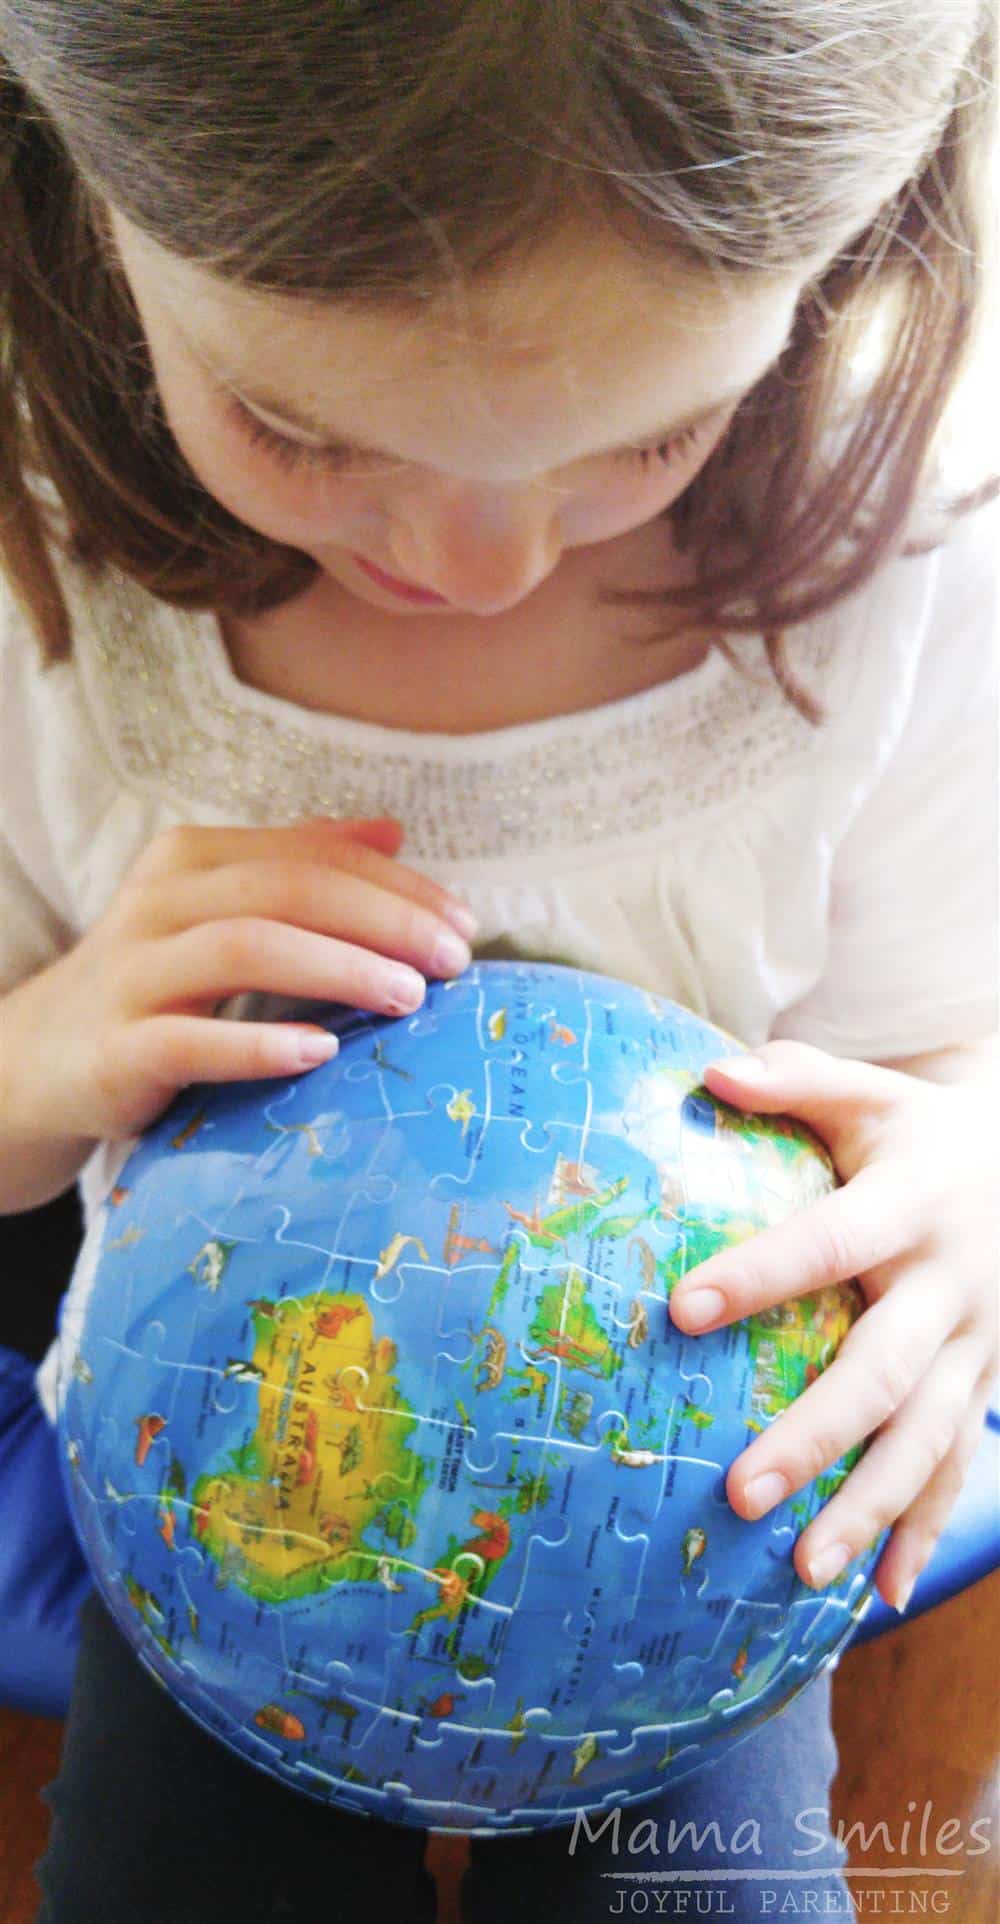 I'm always looking for new ways to connect my kids to all of the countries of the world. We were sent this puzzleball globe to review, and it is a fun way for kids to literally hold the world in their hands!